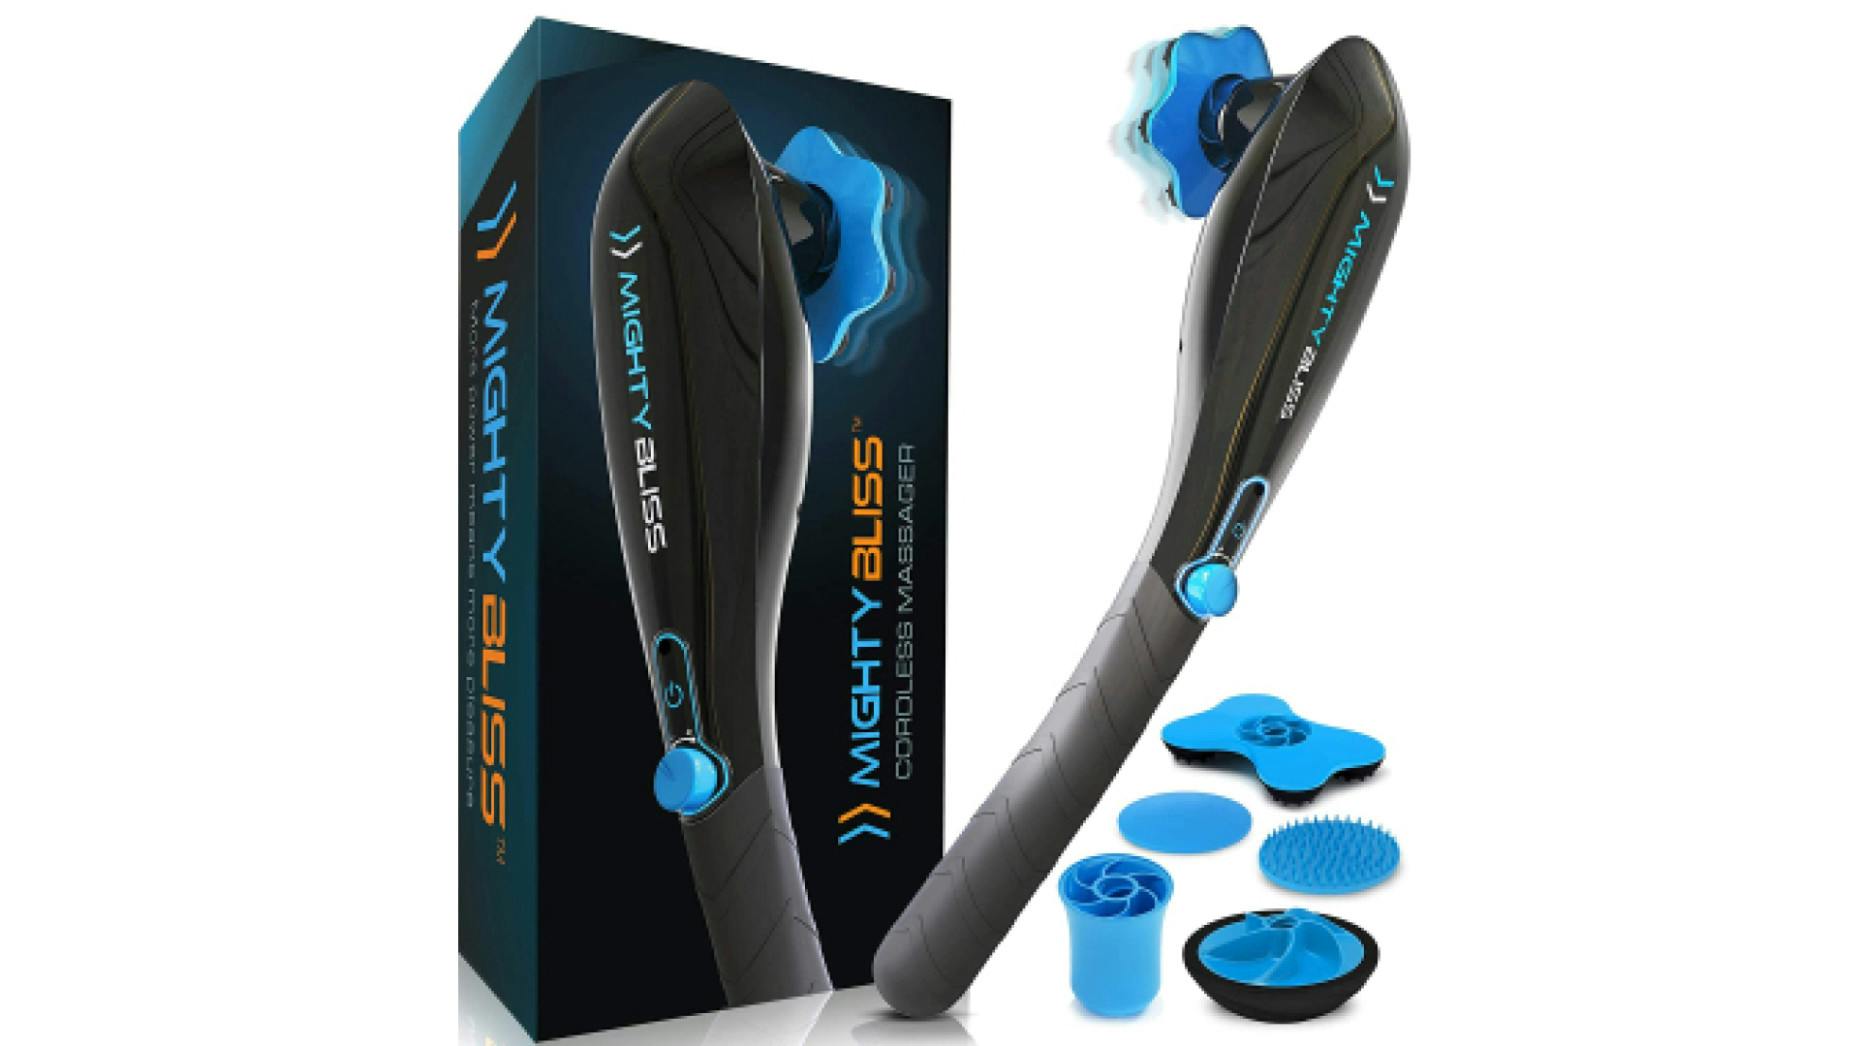 handheld back massager for sore muscles